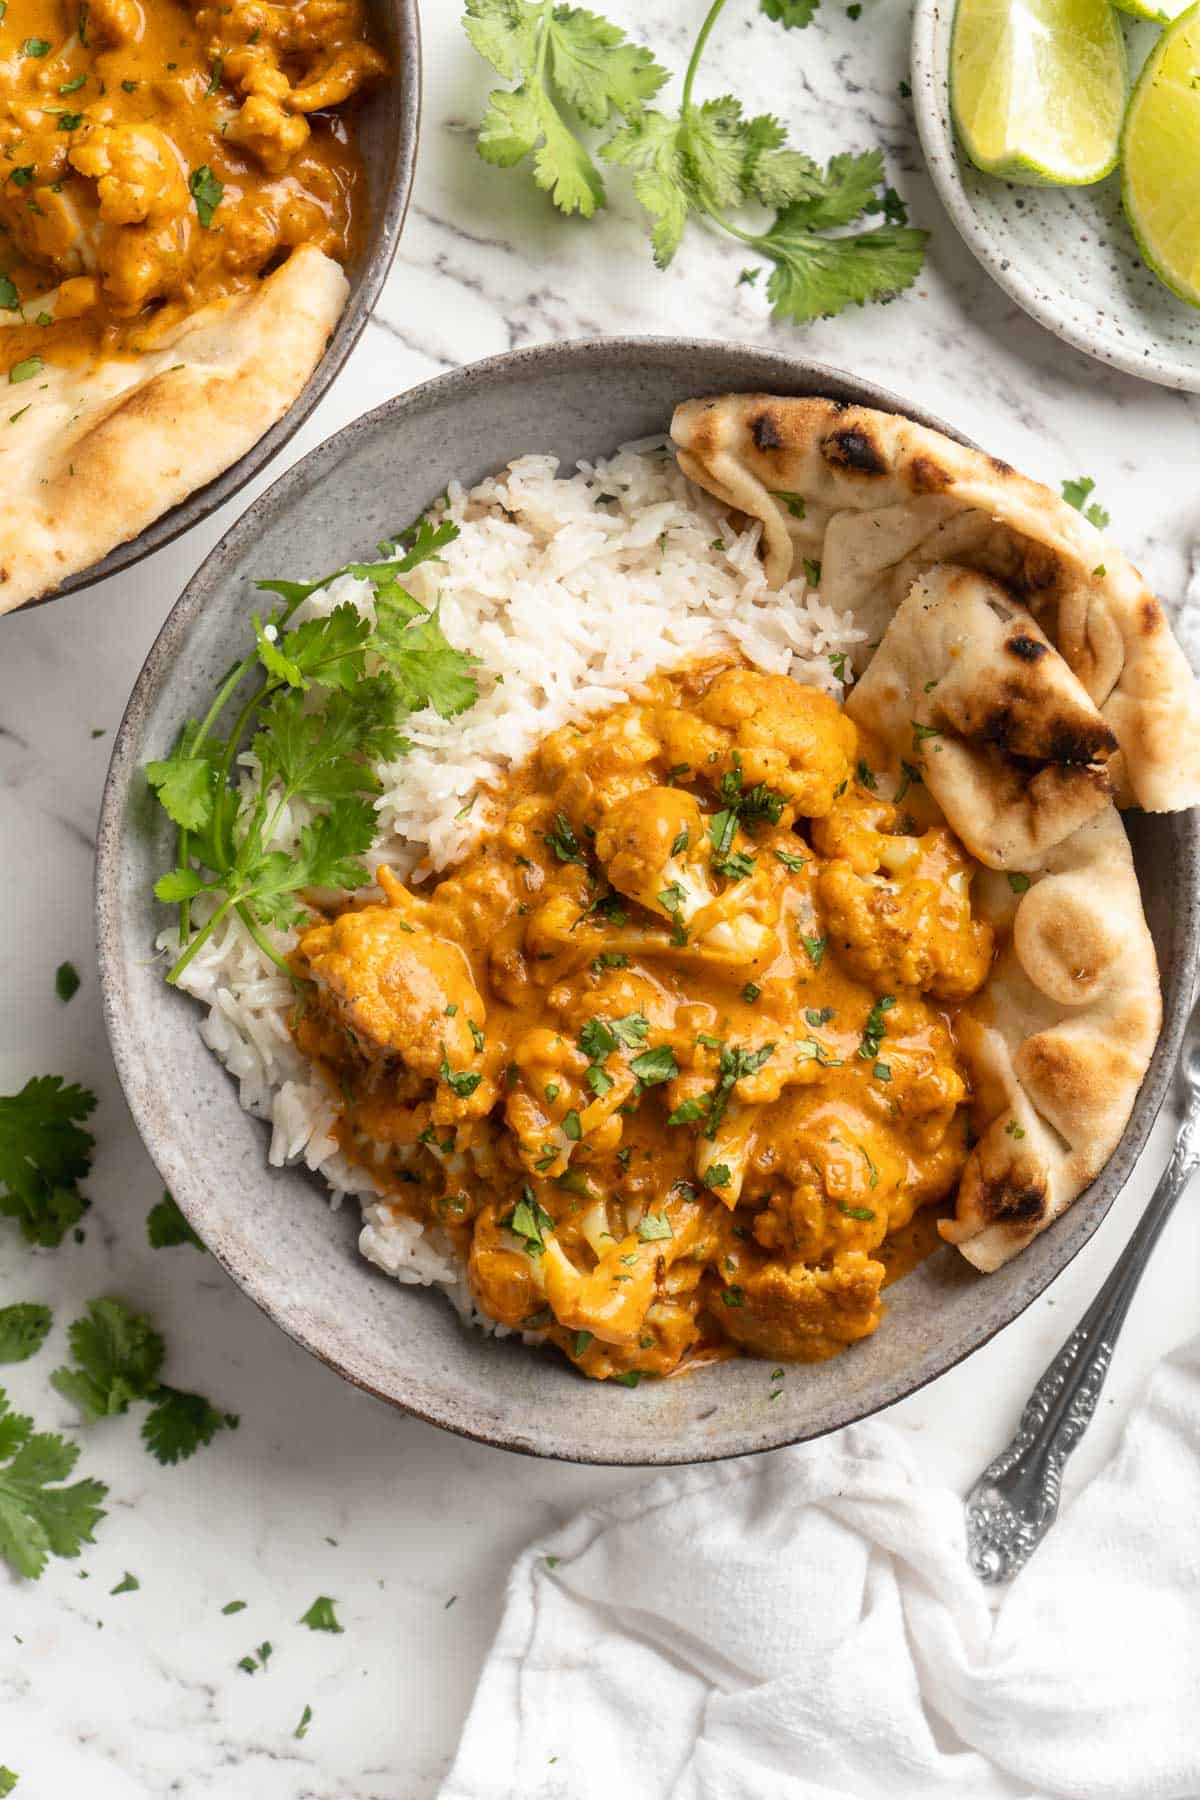 Overhead view of butter cauliflower in bowl with rice and naan